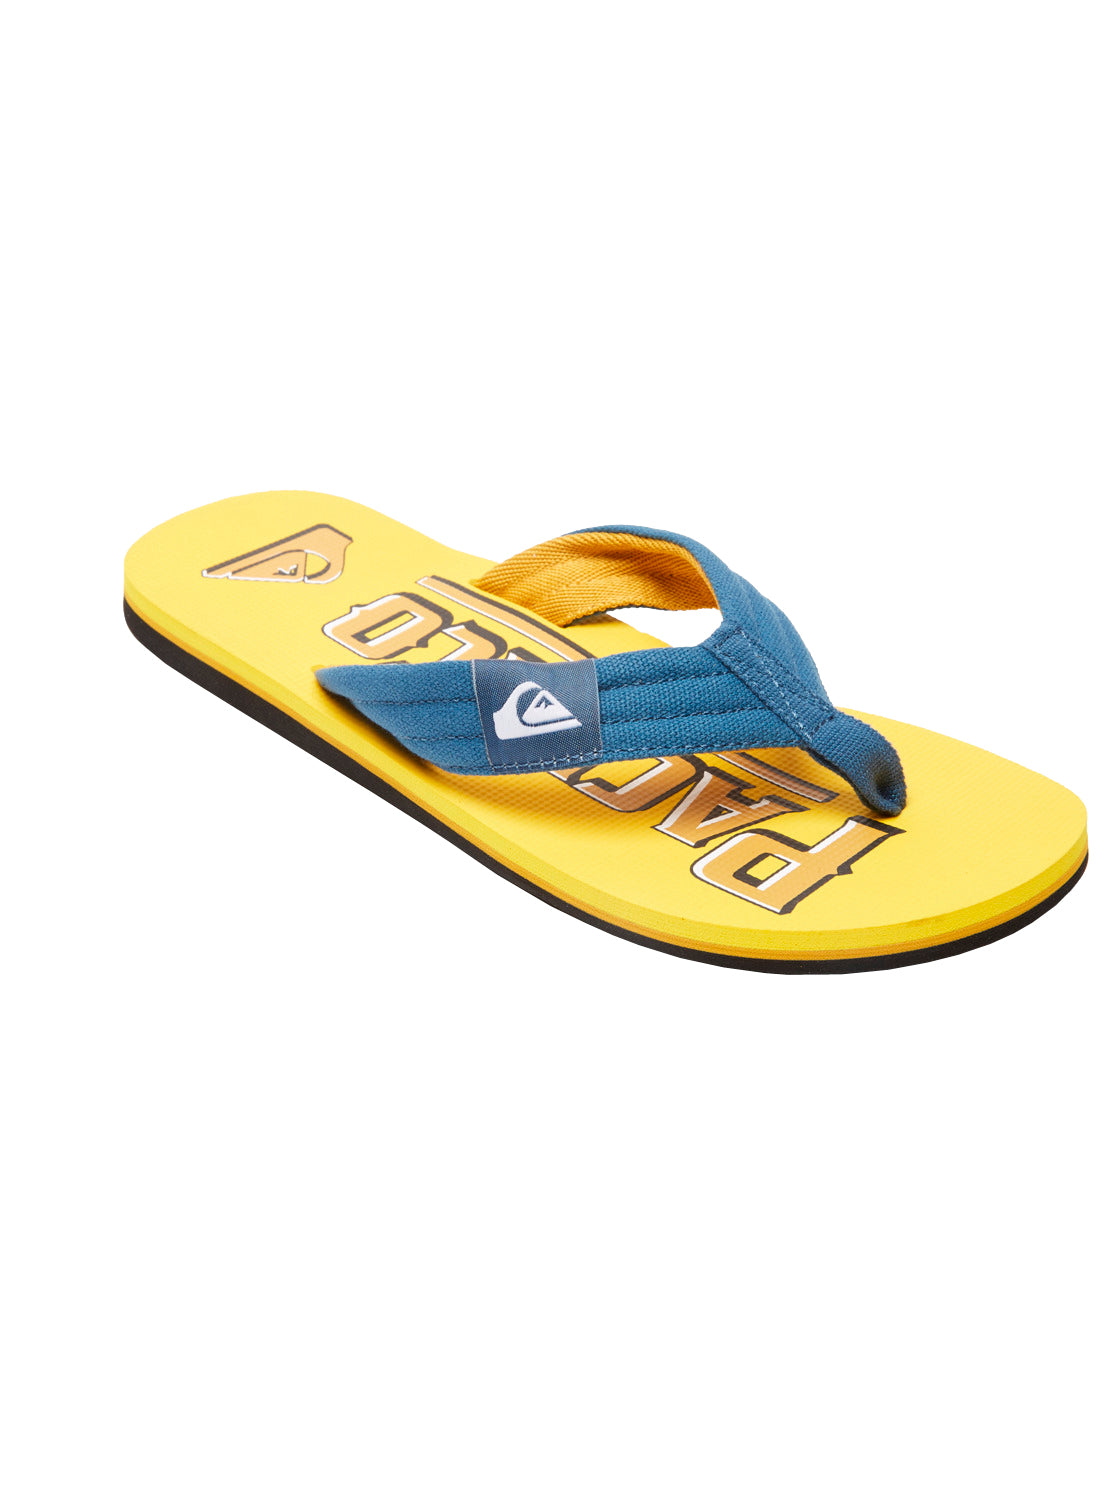 Quiksilver X Pacifico Layback Sandal XKKY 12